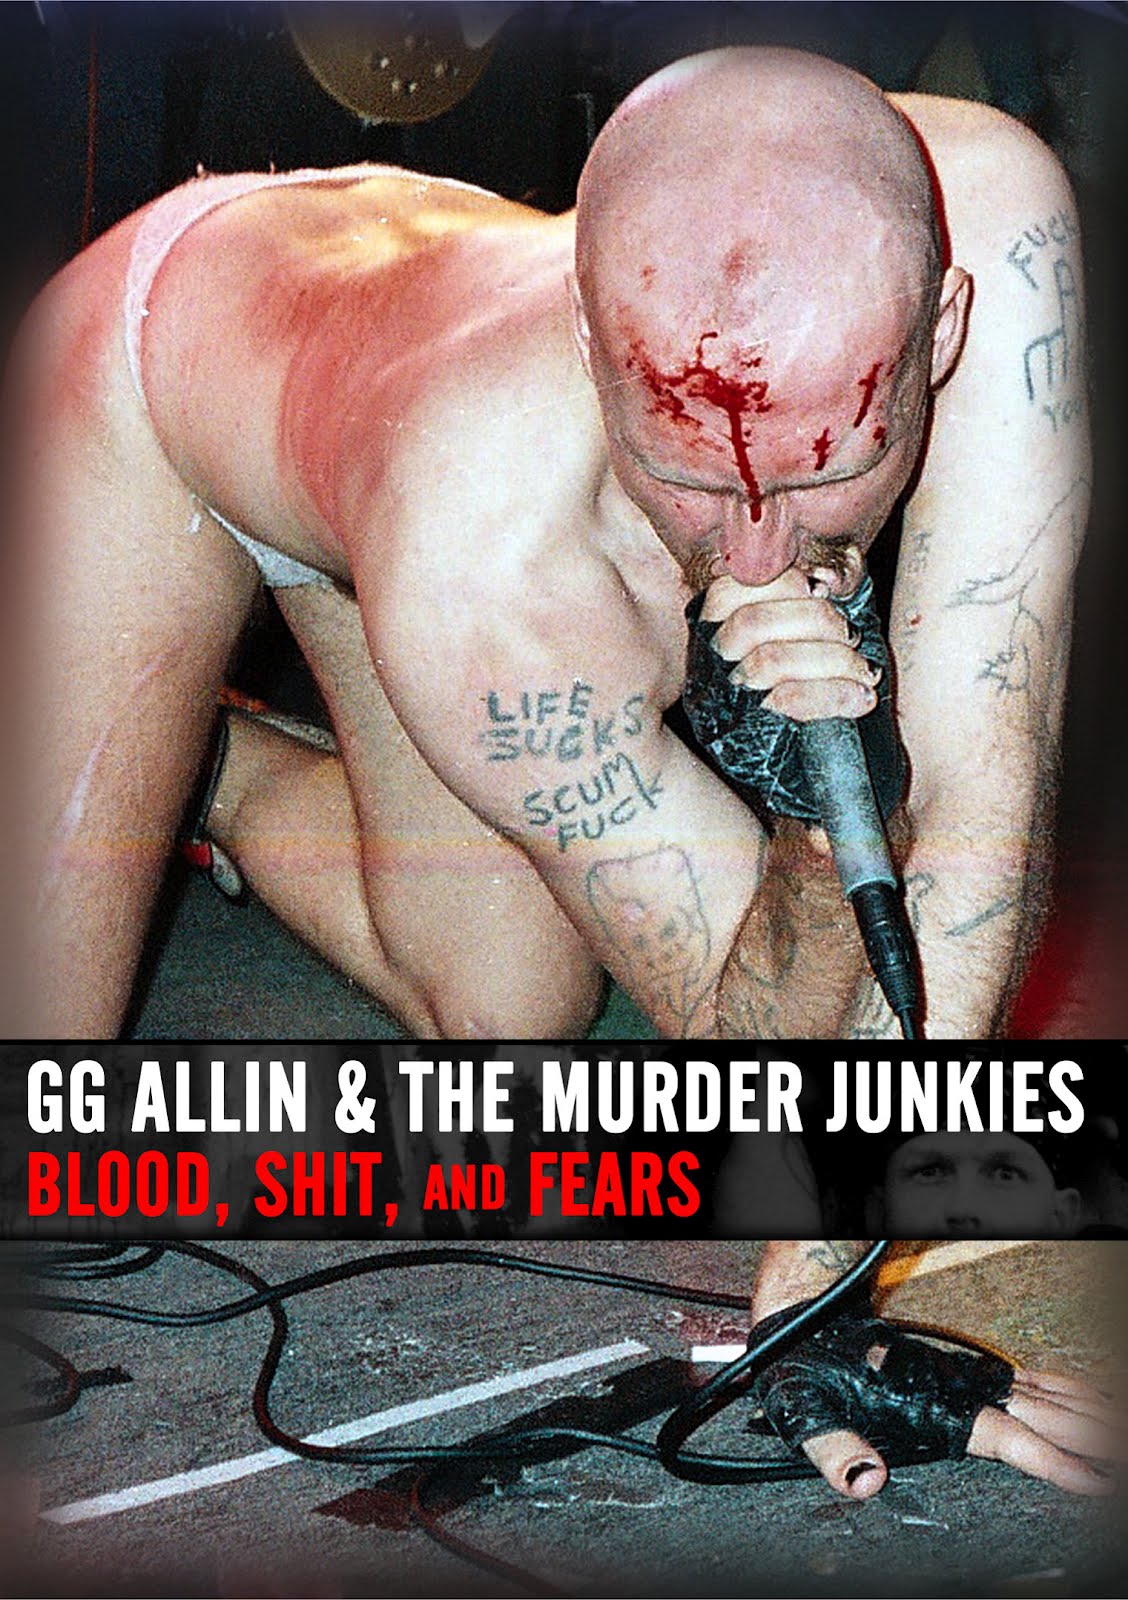 FFanzeen RocknRoll Attitude With Integrity DVD Review GG Allin and the Murder Junkies Blood, Shit, and Fears image